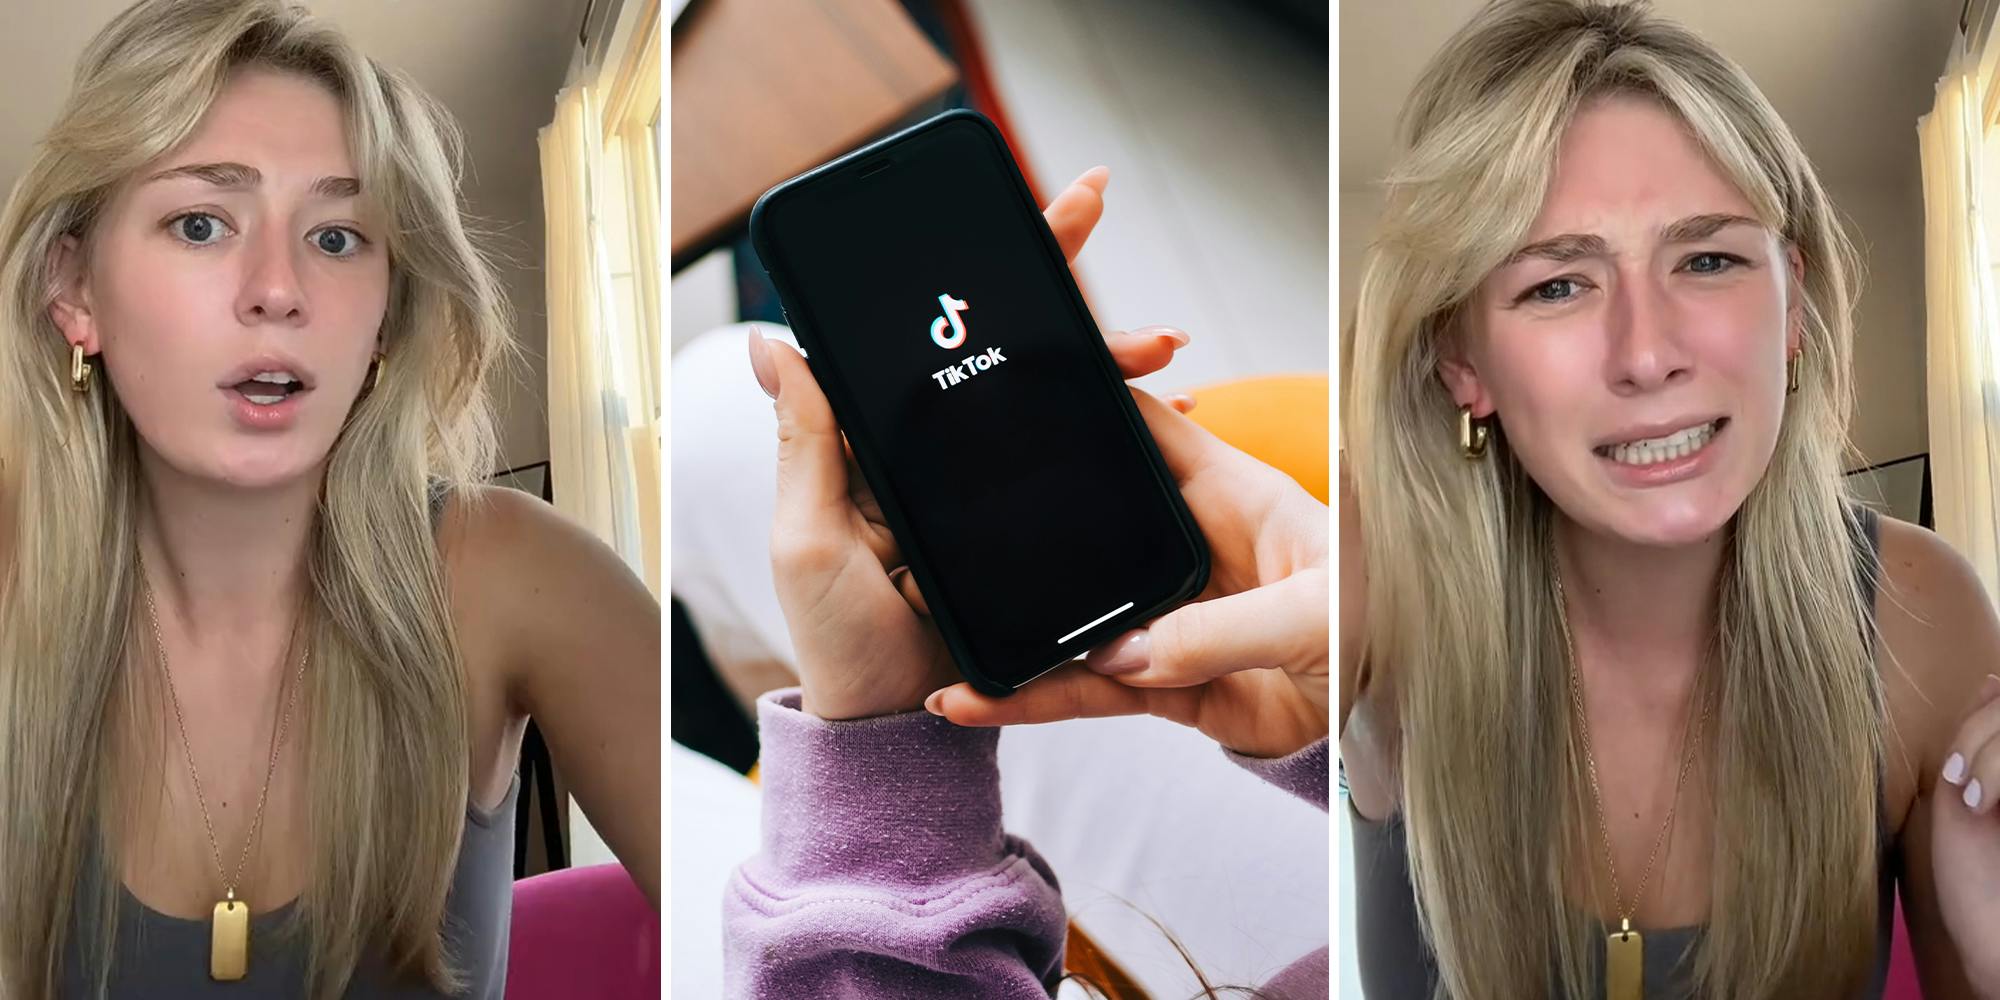 Woman calls out TikTok for becoming a ‘dystopian’ merchandising landscape